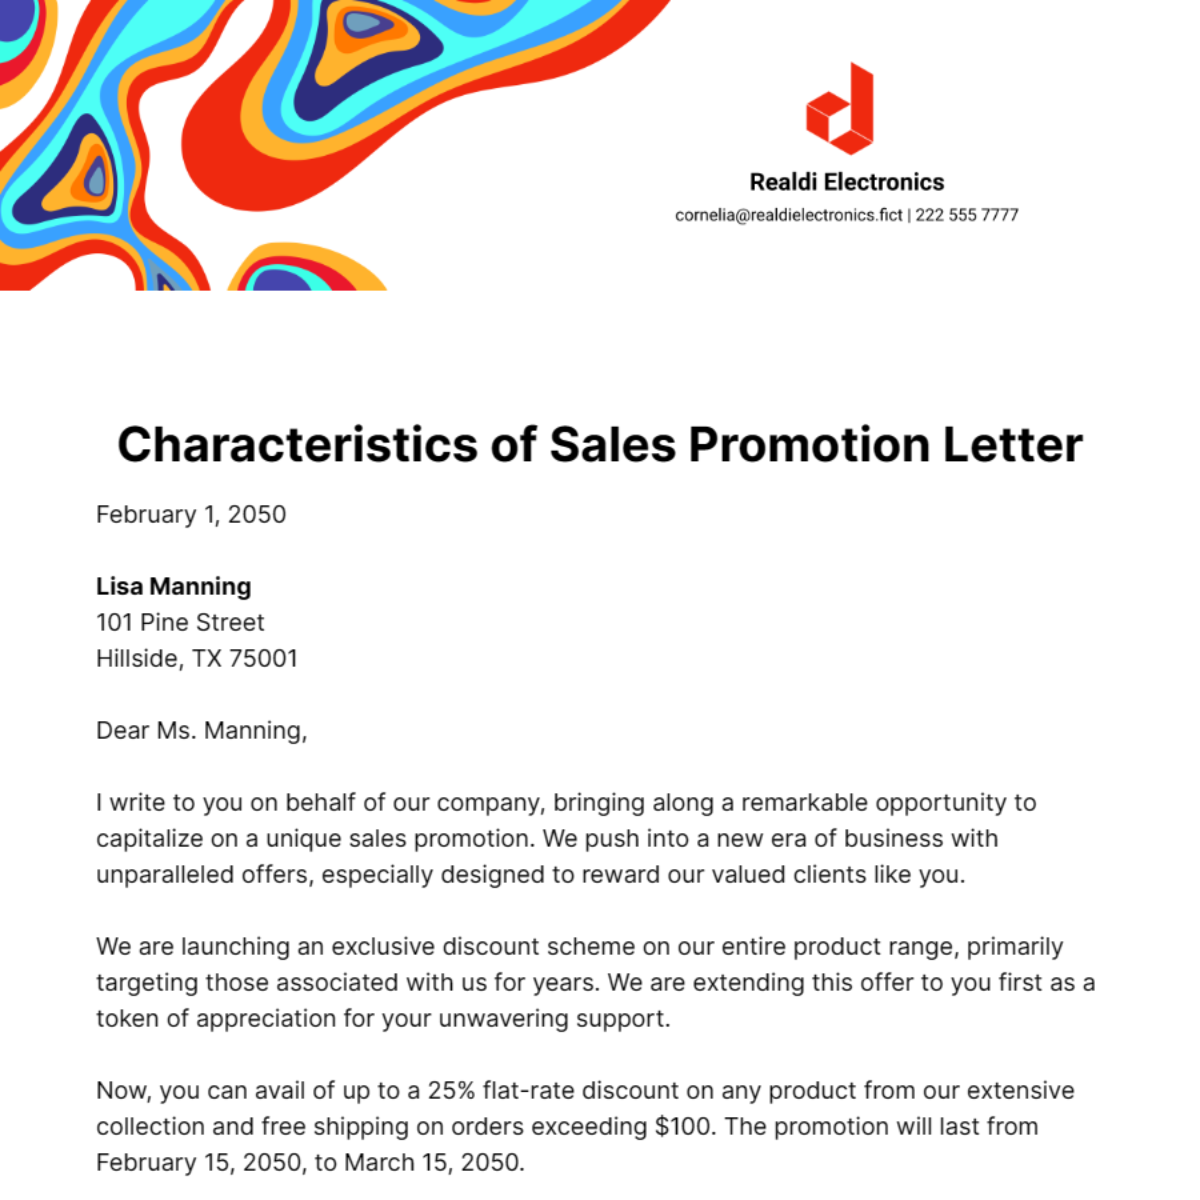 Characteristics of Sales Promotion Letter Template